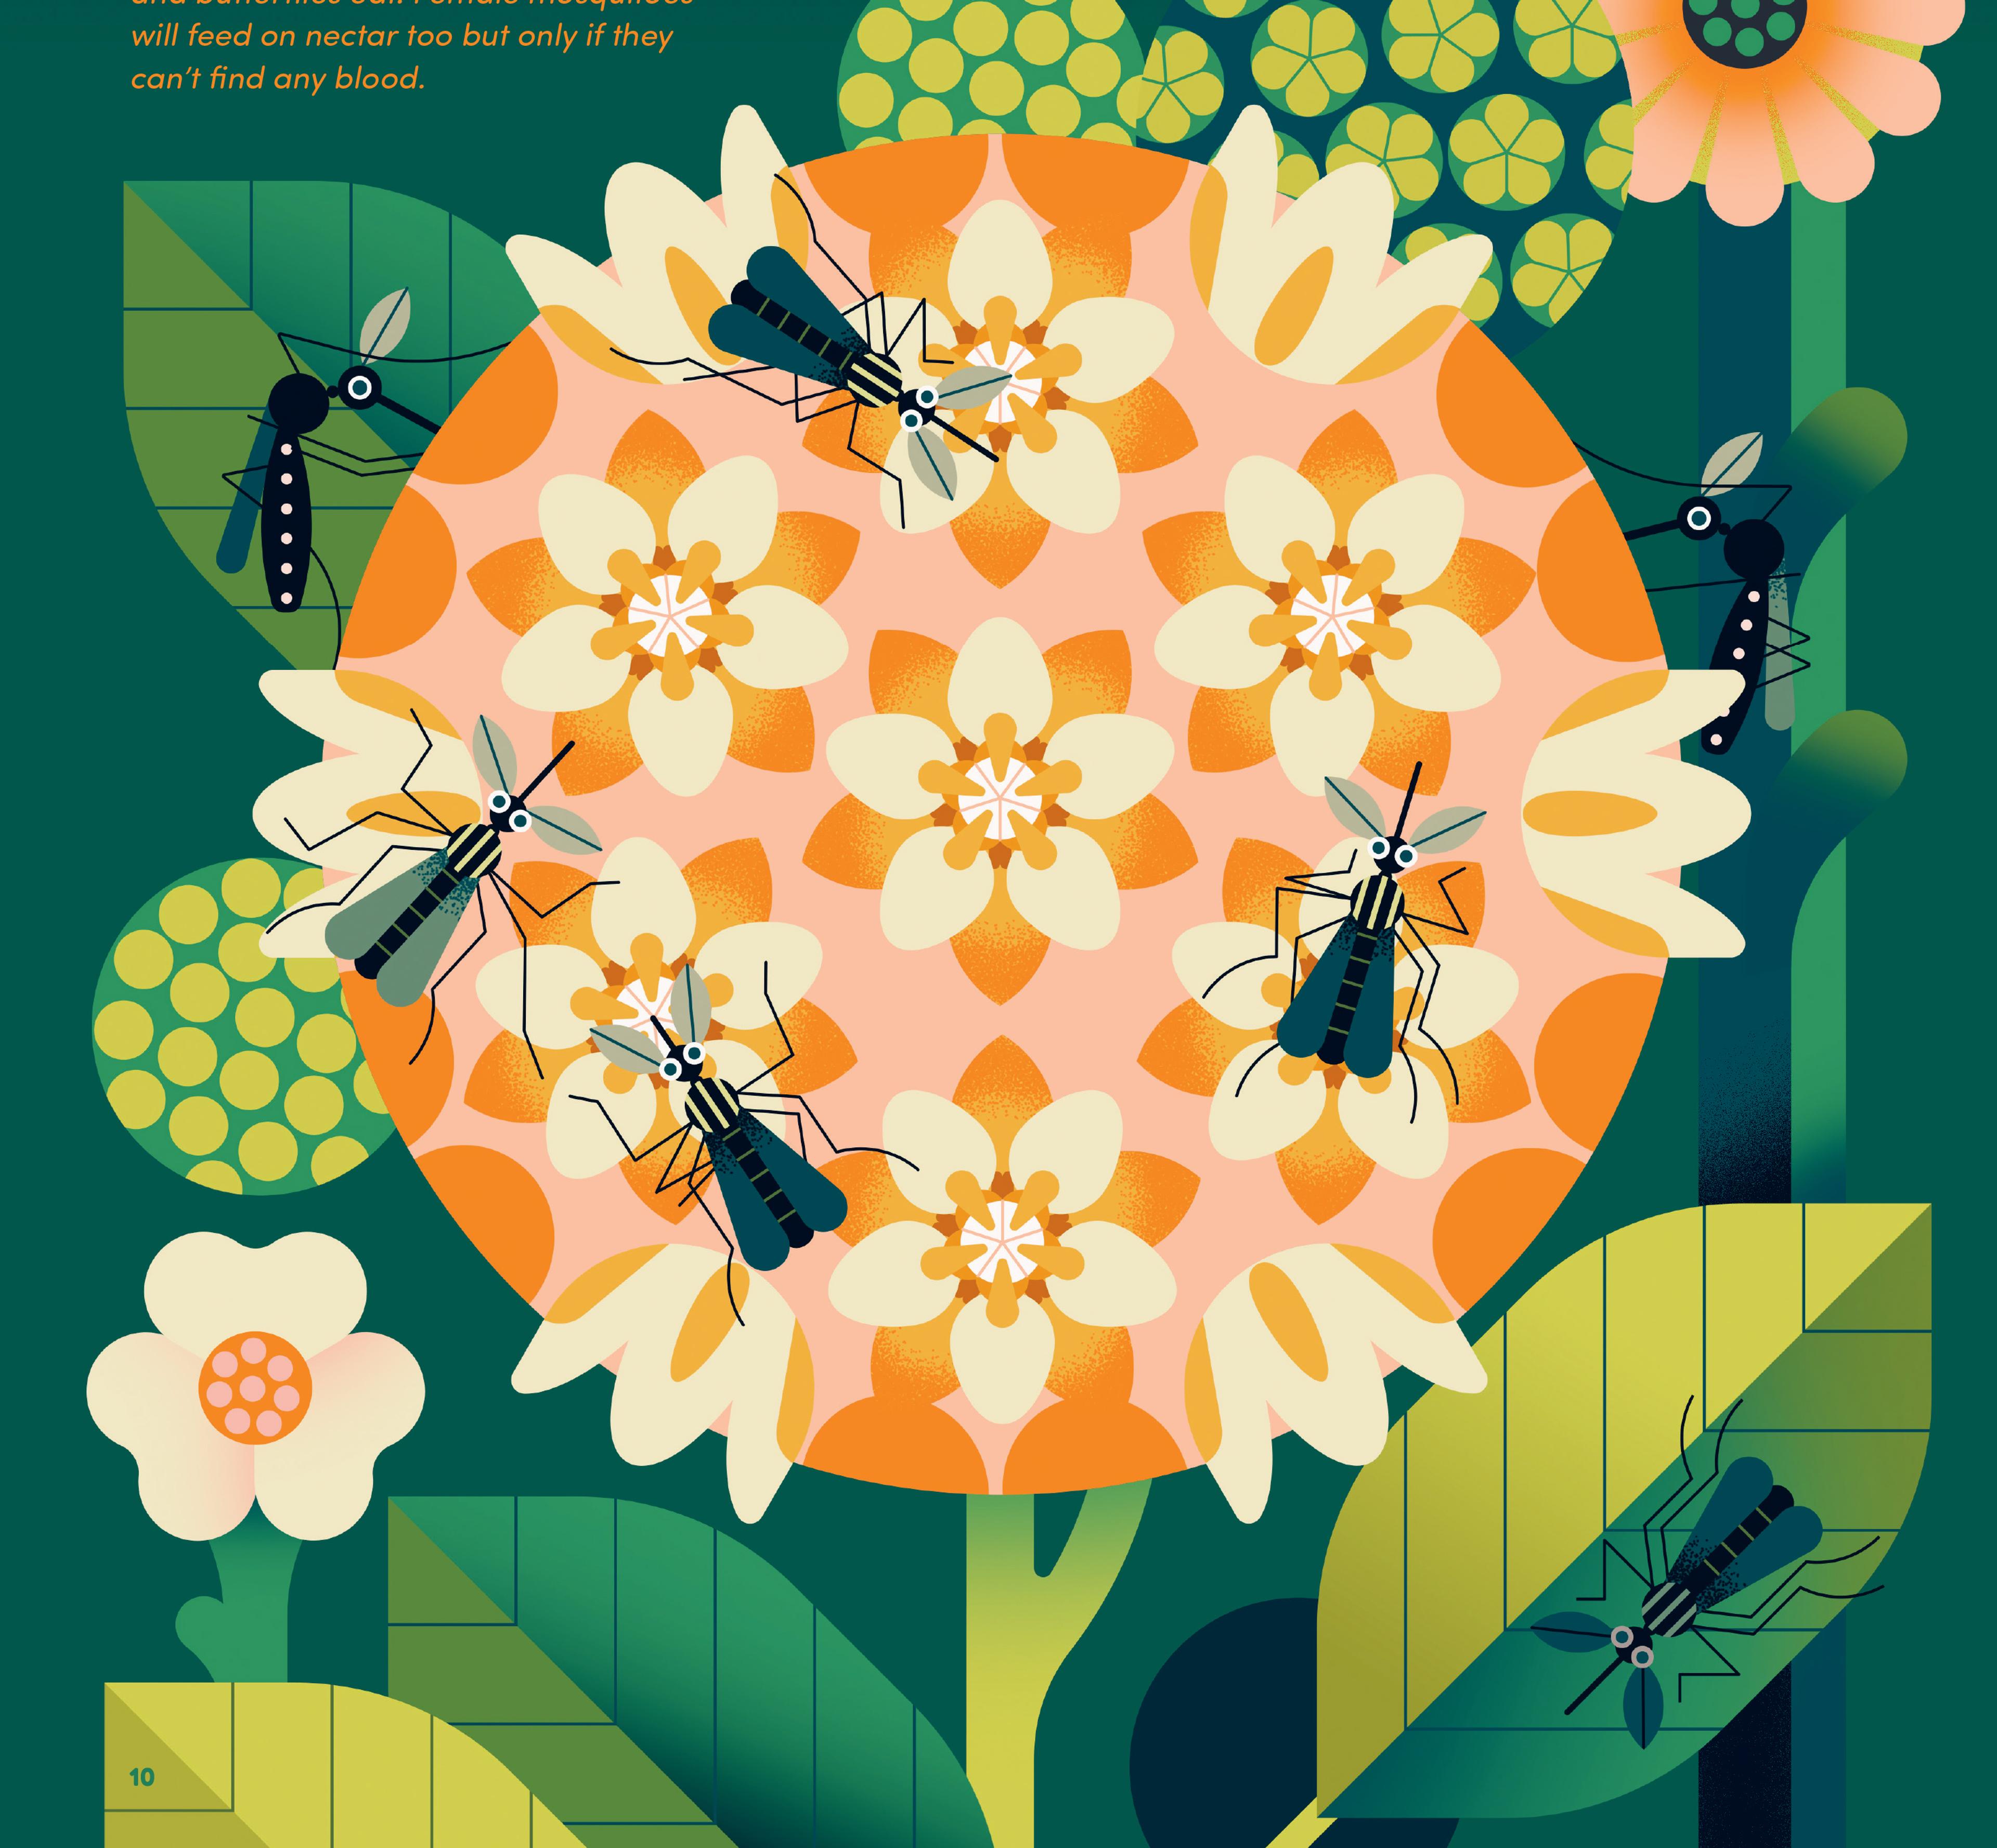 Graphic illustration of winged insects on a large pink and orange flower against a lush forest green background